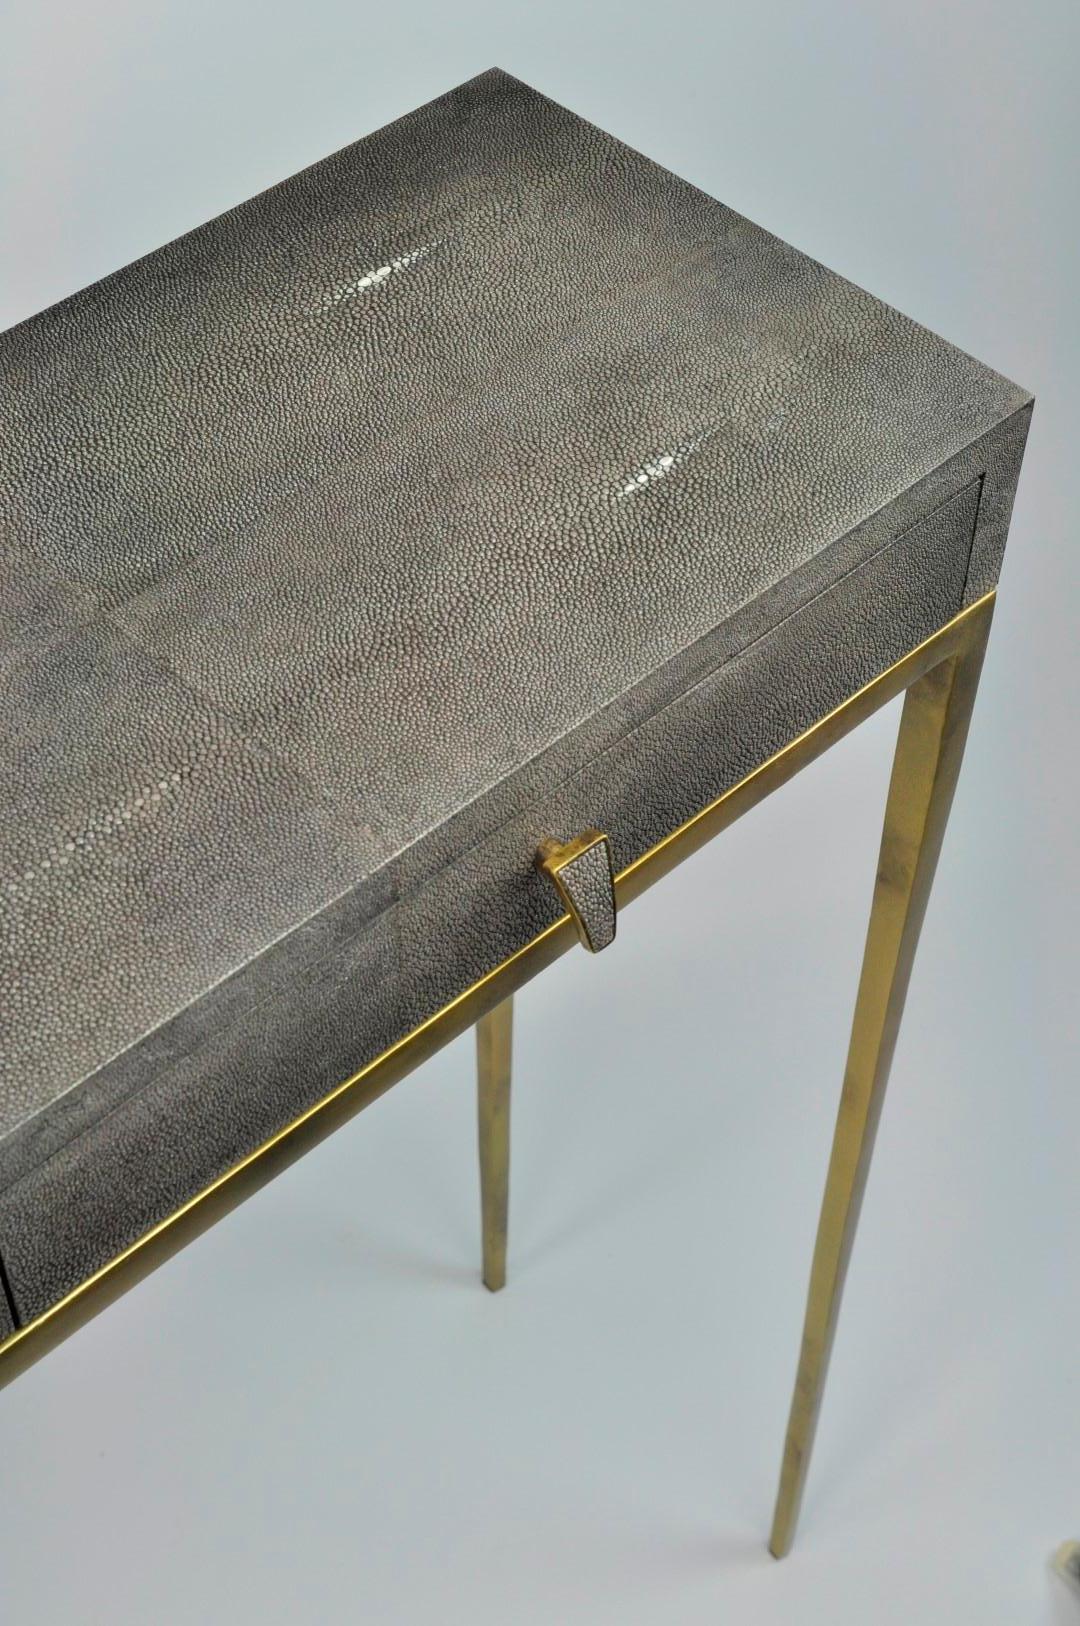 The console table CS419 is made of shagreen.
It has two thin drawers and the legs have an old brass patina.
This piece will settle very well in your entrance or your living room.
The style is timeless and chic. No way to get bored of it.
The